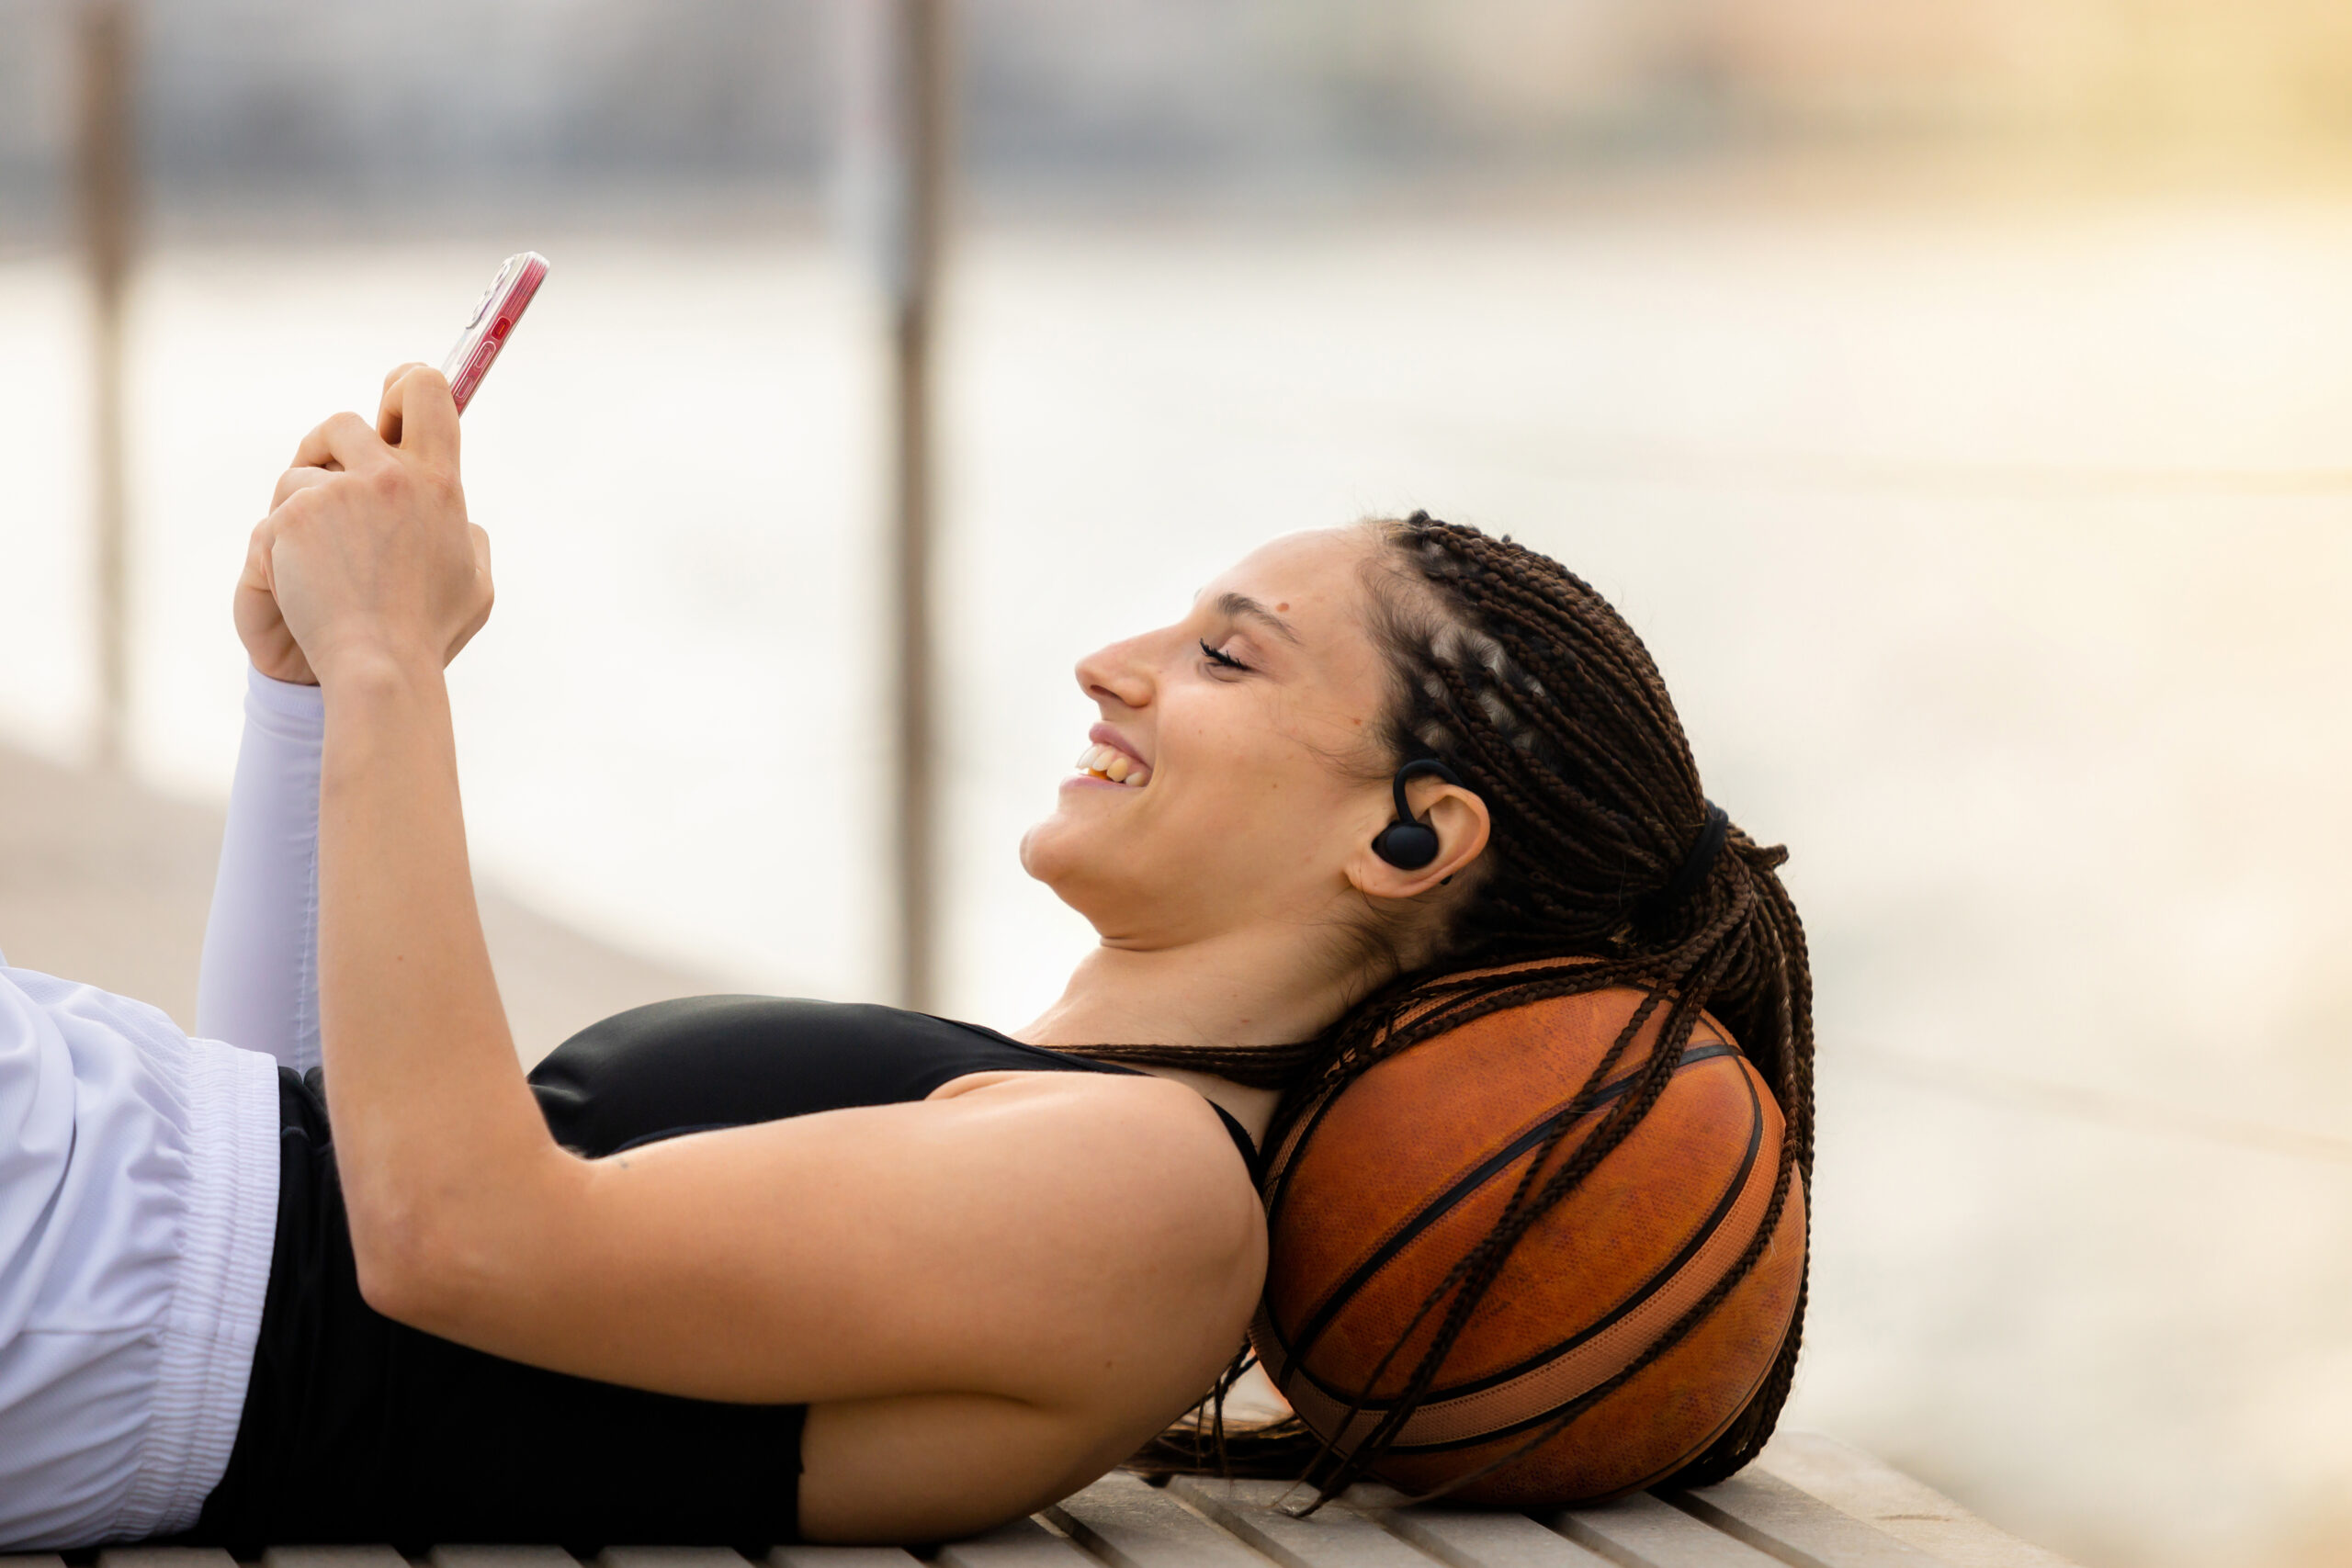 Athletic young woman smiling lying on the ground, head resting on a basketball while playing on her mobile phone